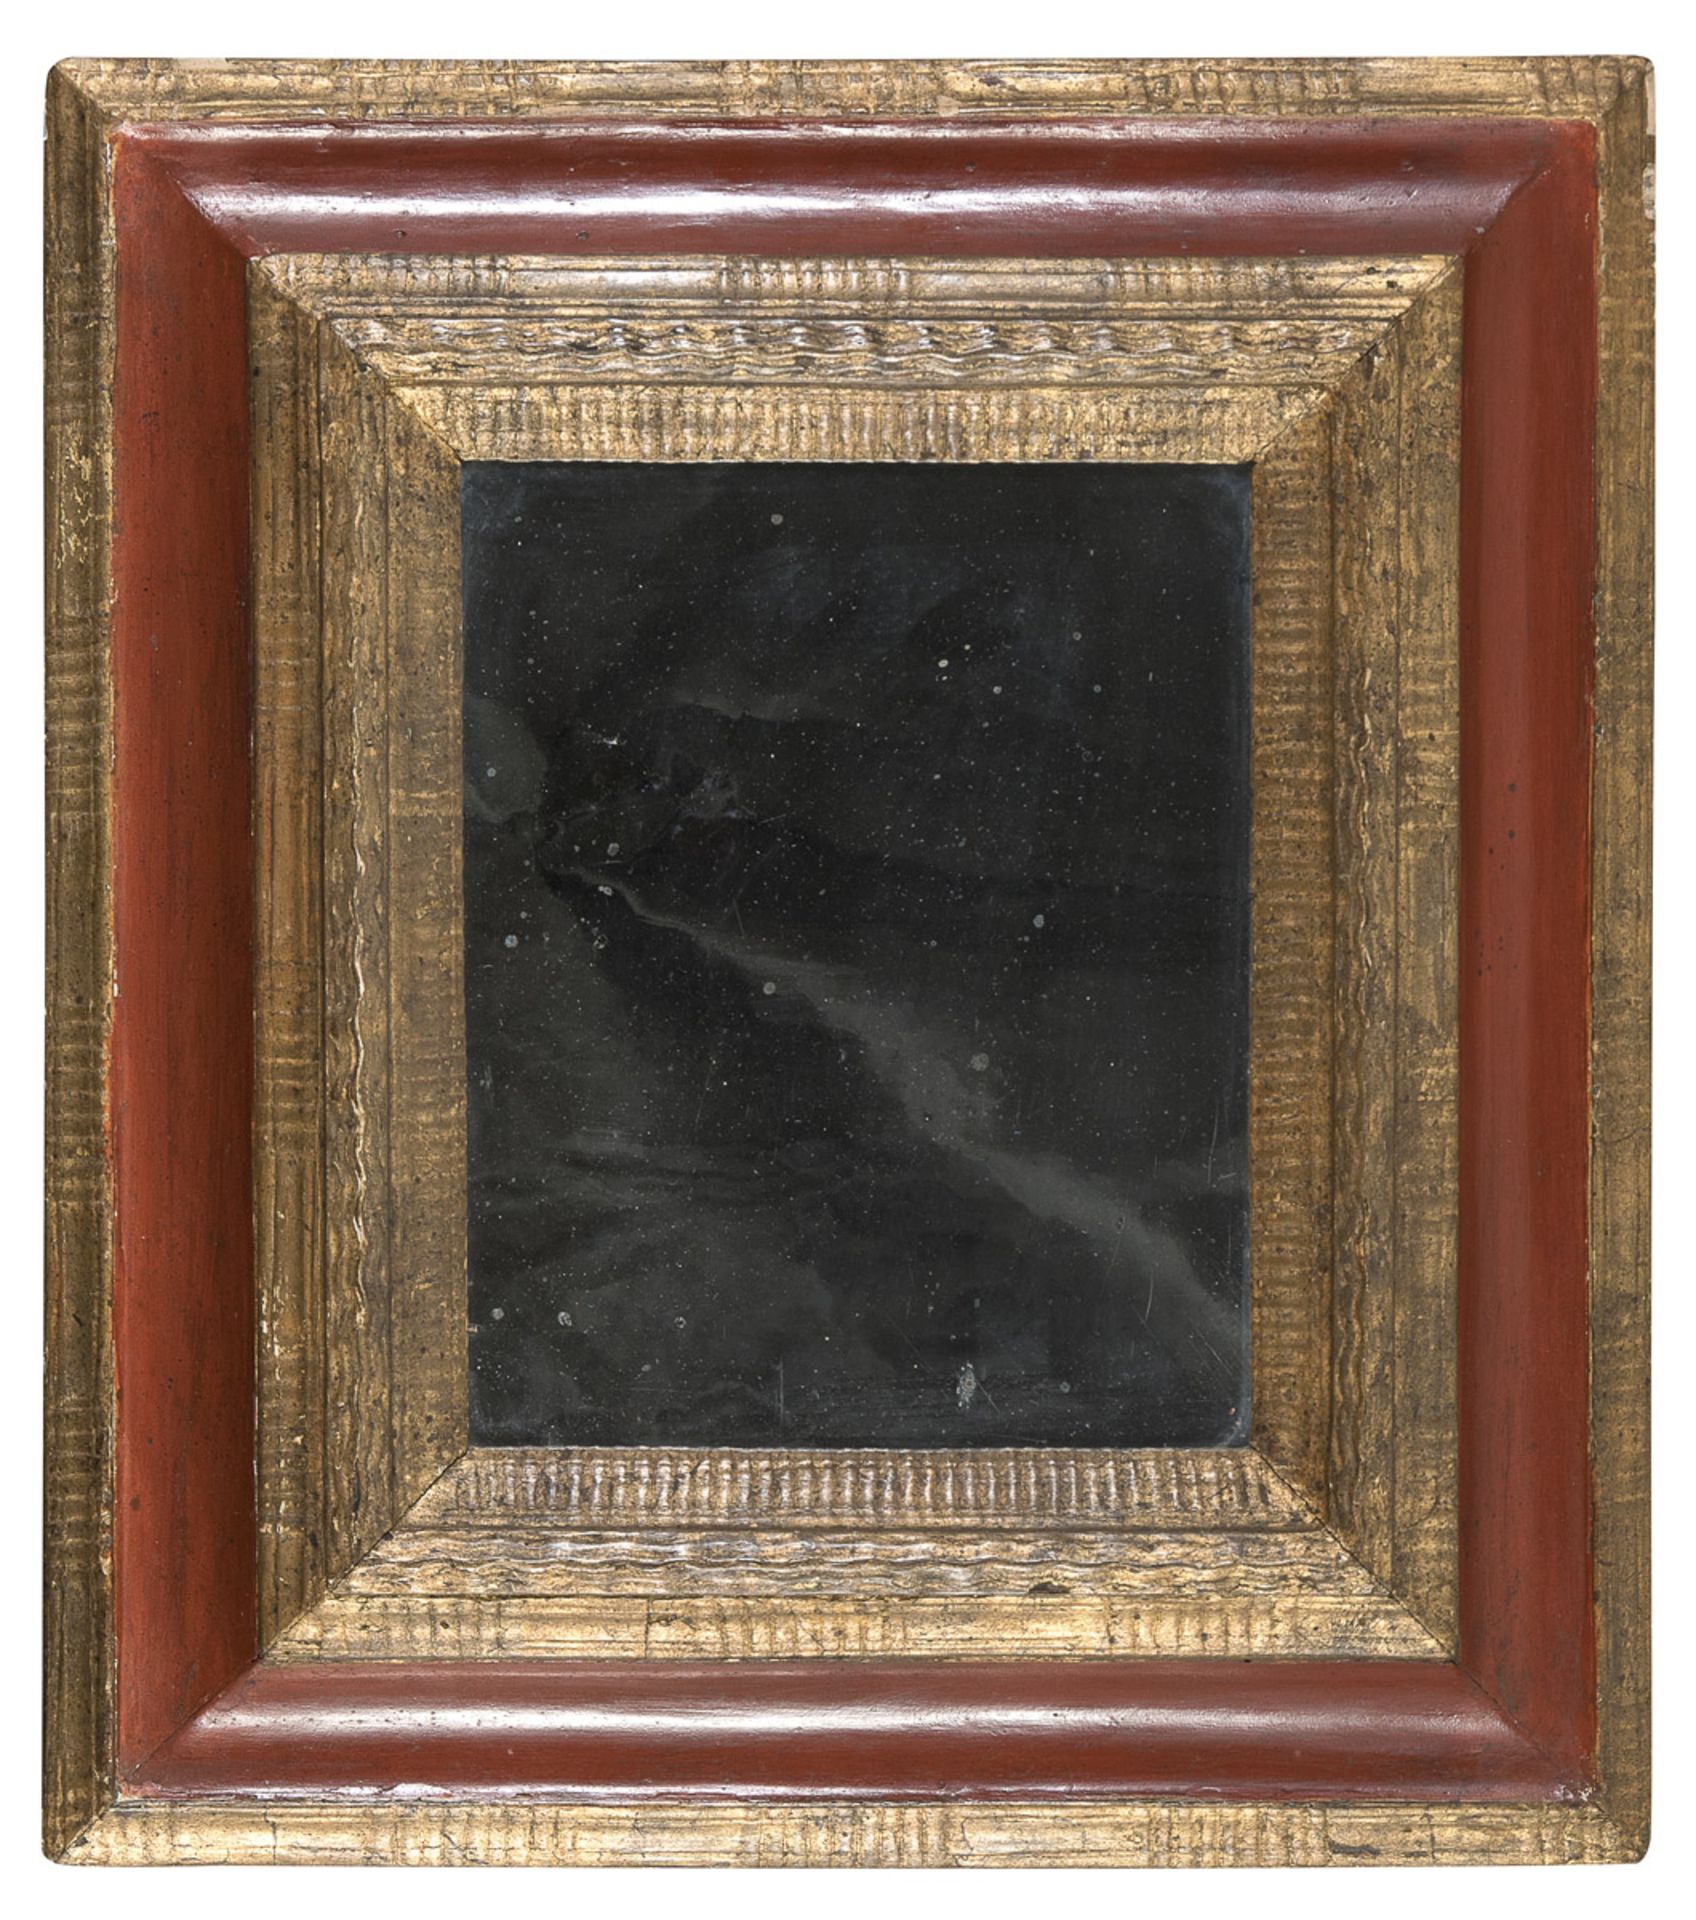 SMALL MIRROR IN RED LACQUERED WOOD - LATE 18TH CENTURY